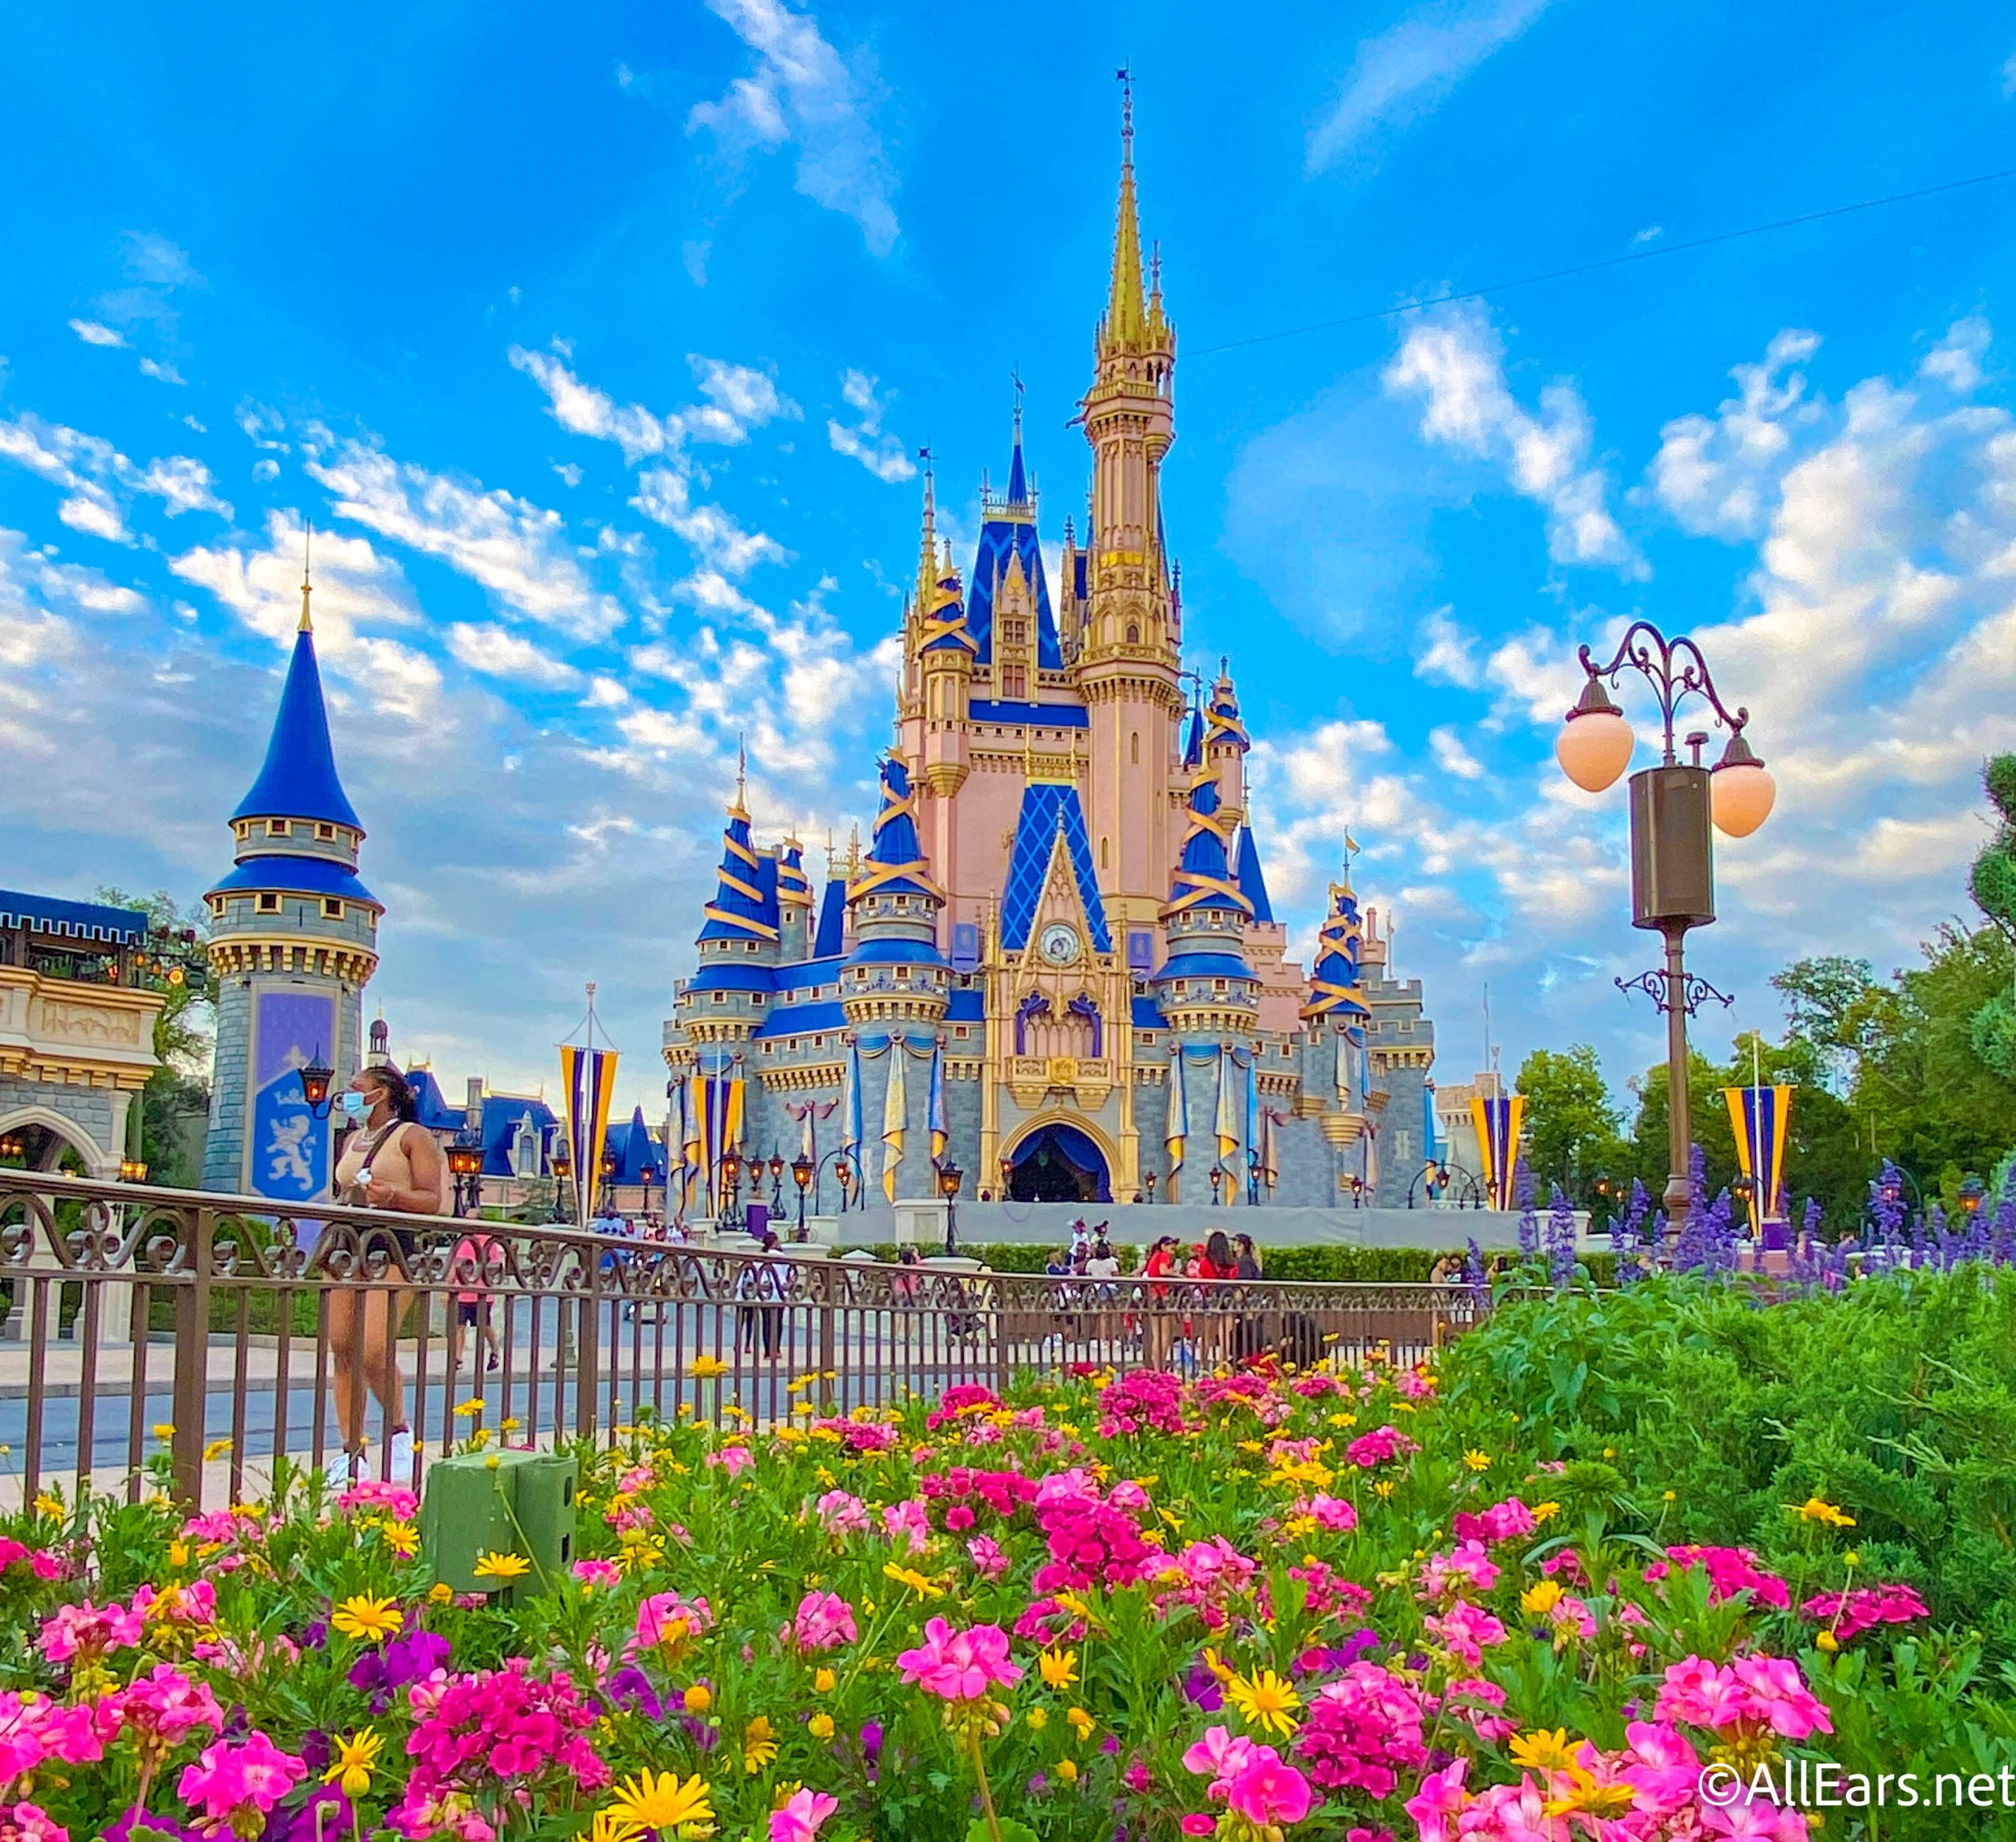 15 Stunning Disney World Wallpapers to Bring the Magic to Your Phone -  